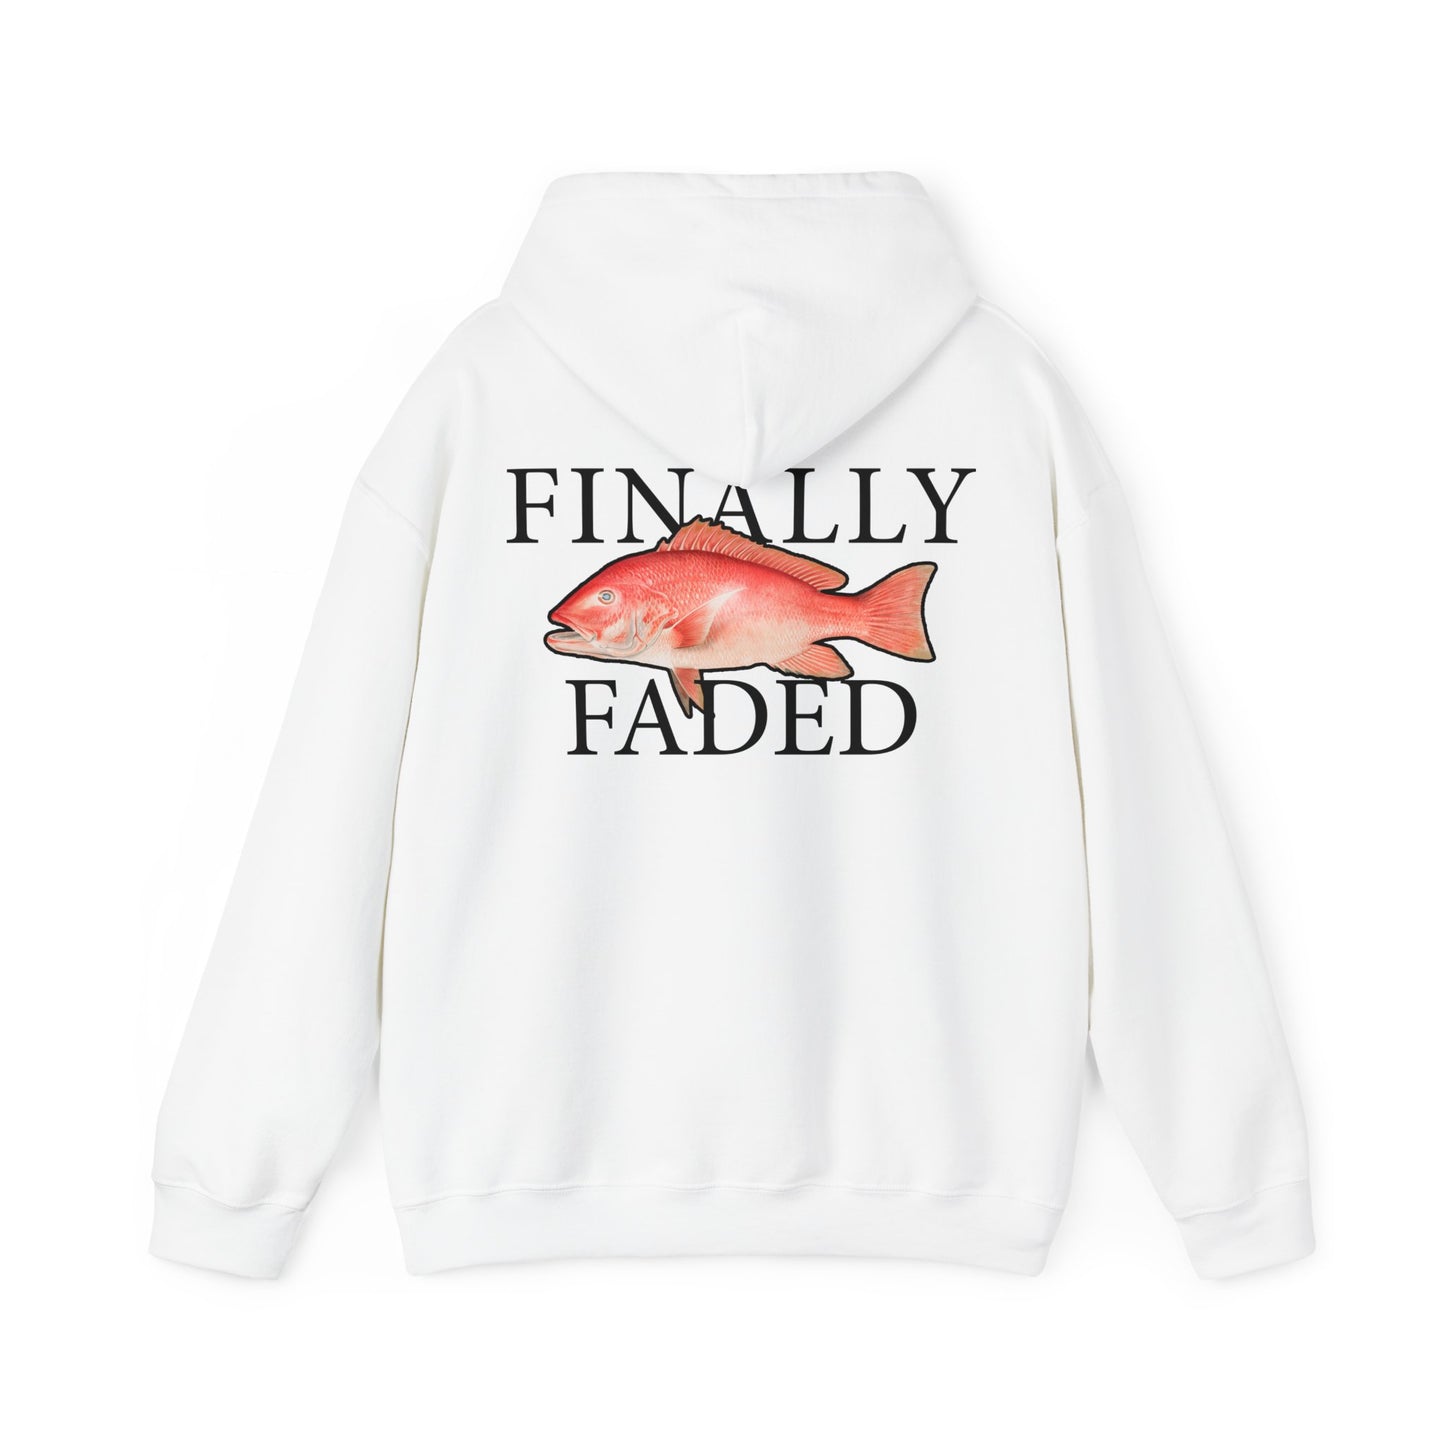 Finally Faded - Hooded Edition